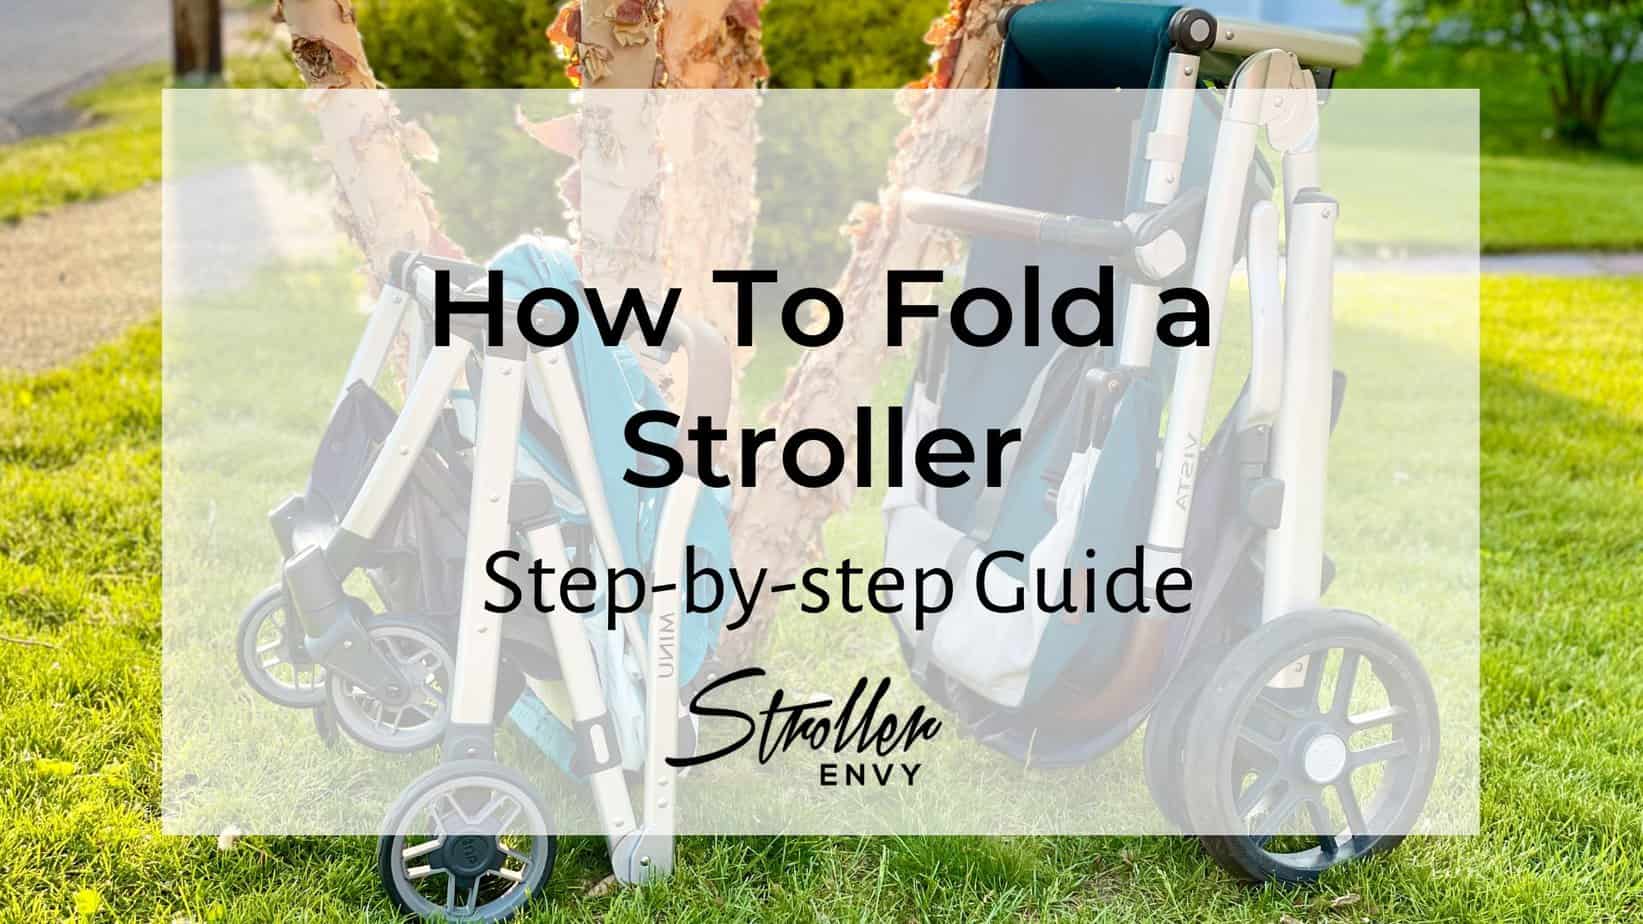 How To Fold a Stroller